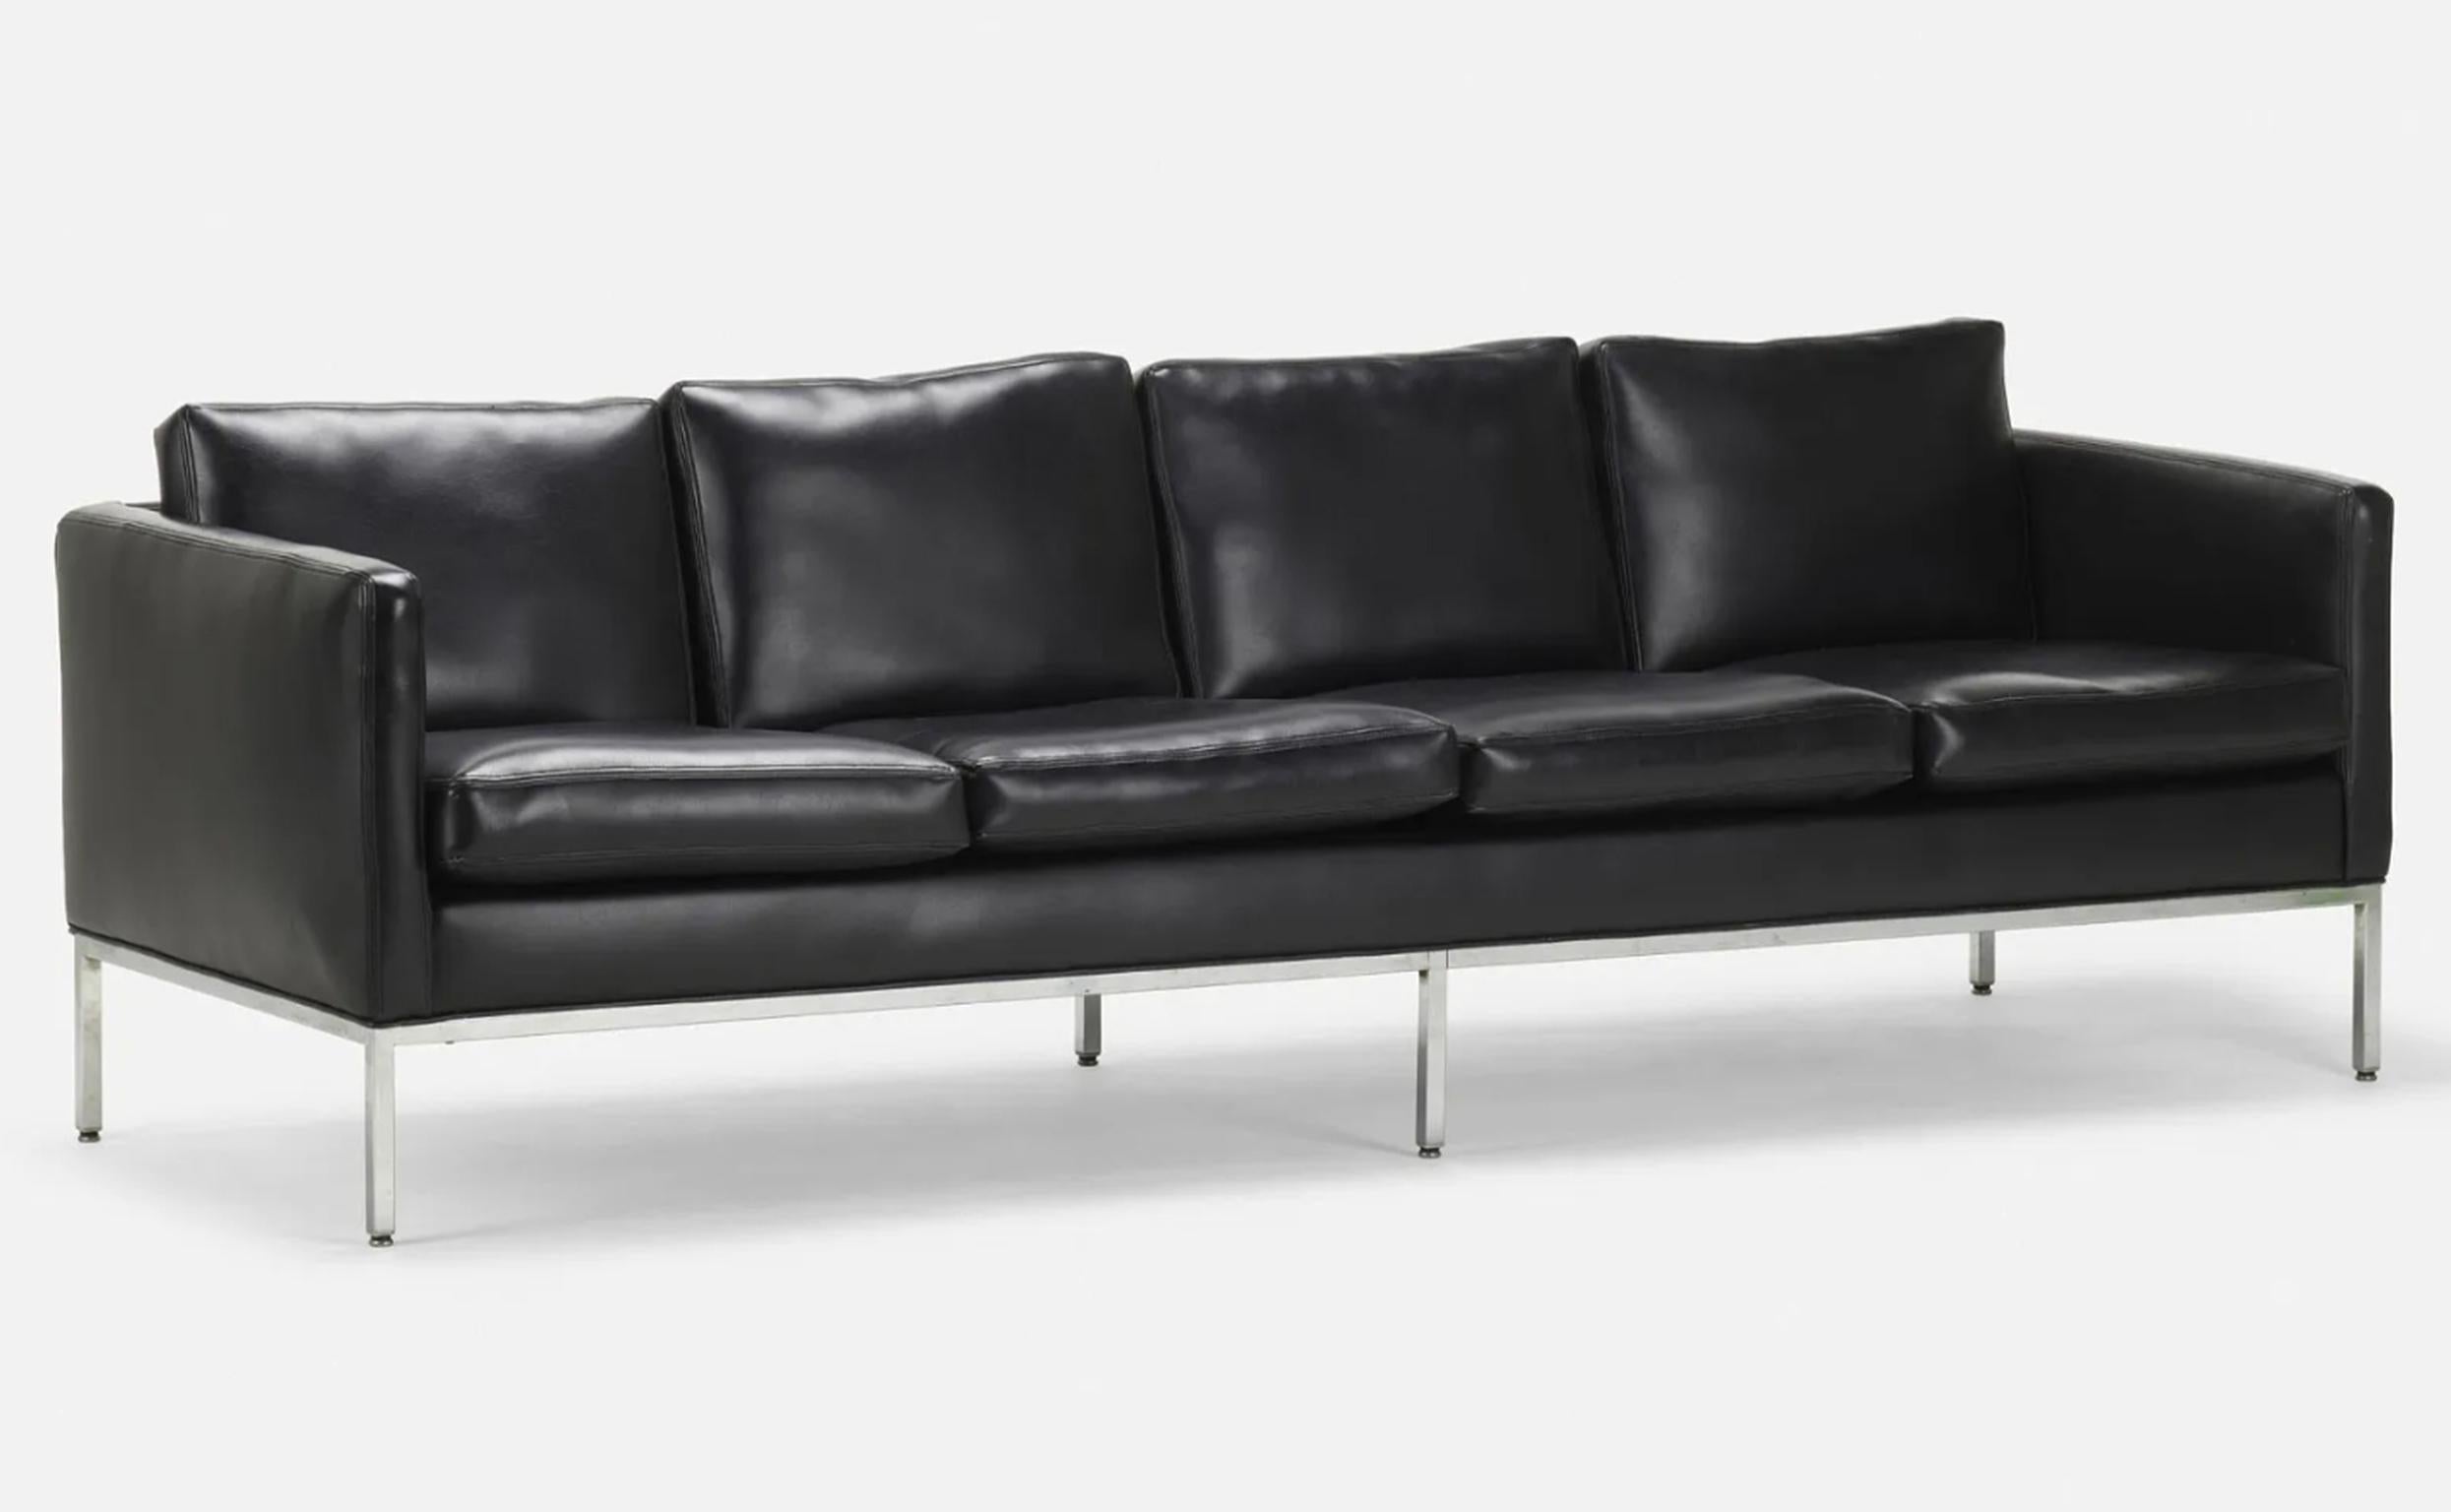 Mid-Century Modern black Naugahyde faux leather chrome sofa 93” long. Very high quality 4 seat Mid-Century Modern sofa in the style of Florence Knoll. Black soft naugahyde faux leather. Sits on a 6 leg chrome plated steel frame base. Very clean sofa